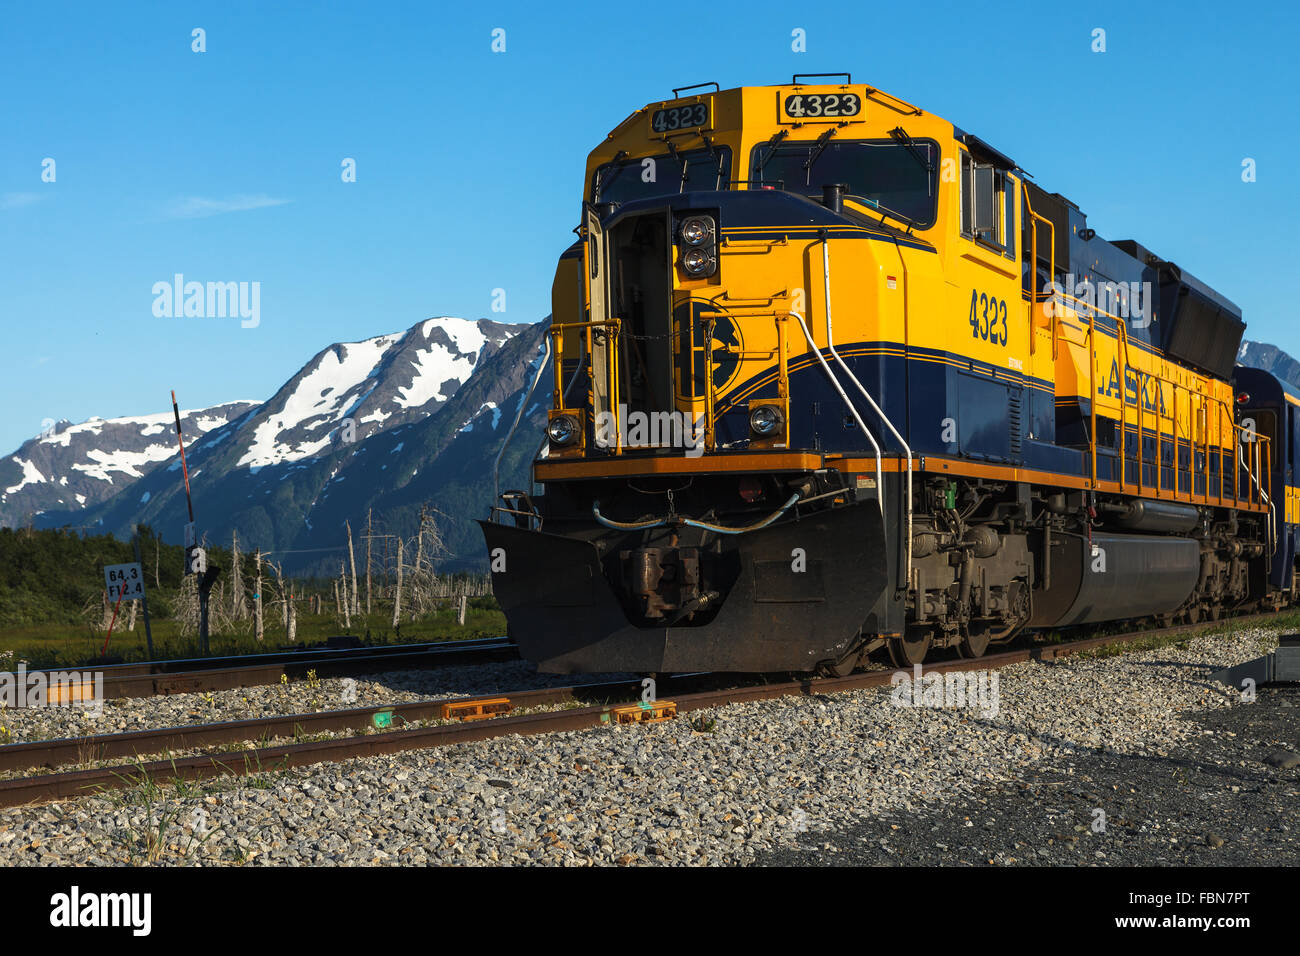 An Alaska Railroad train traveling between Seward and Anchorage by Turnagain Arm, Southcentral Alaska, United States of America Stock Photo